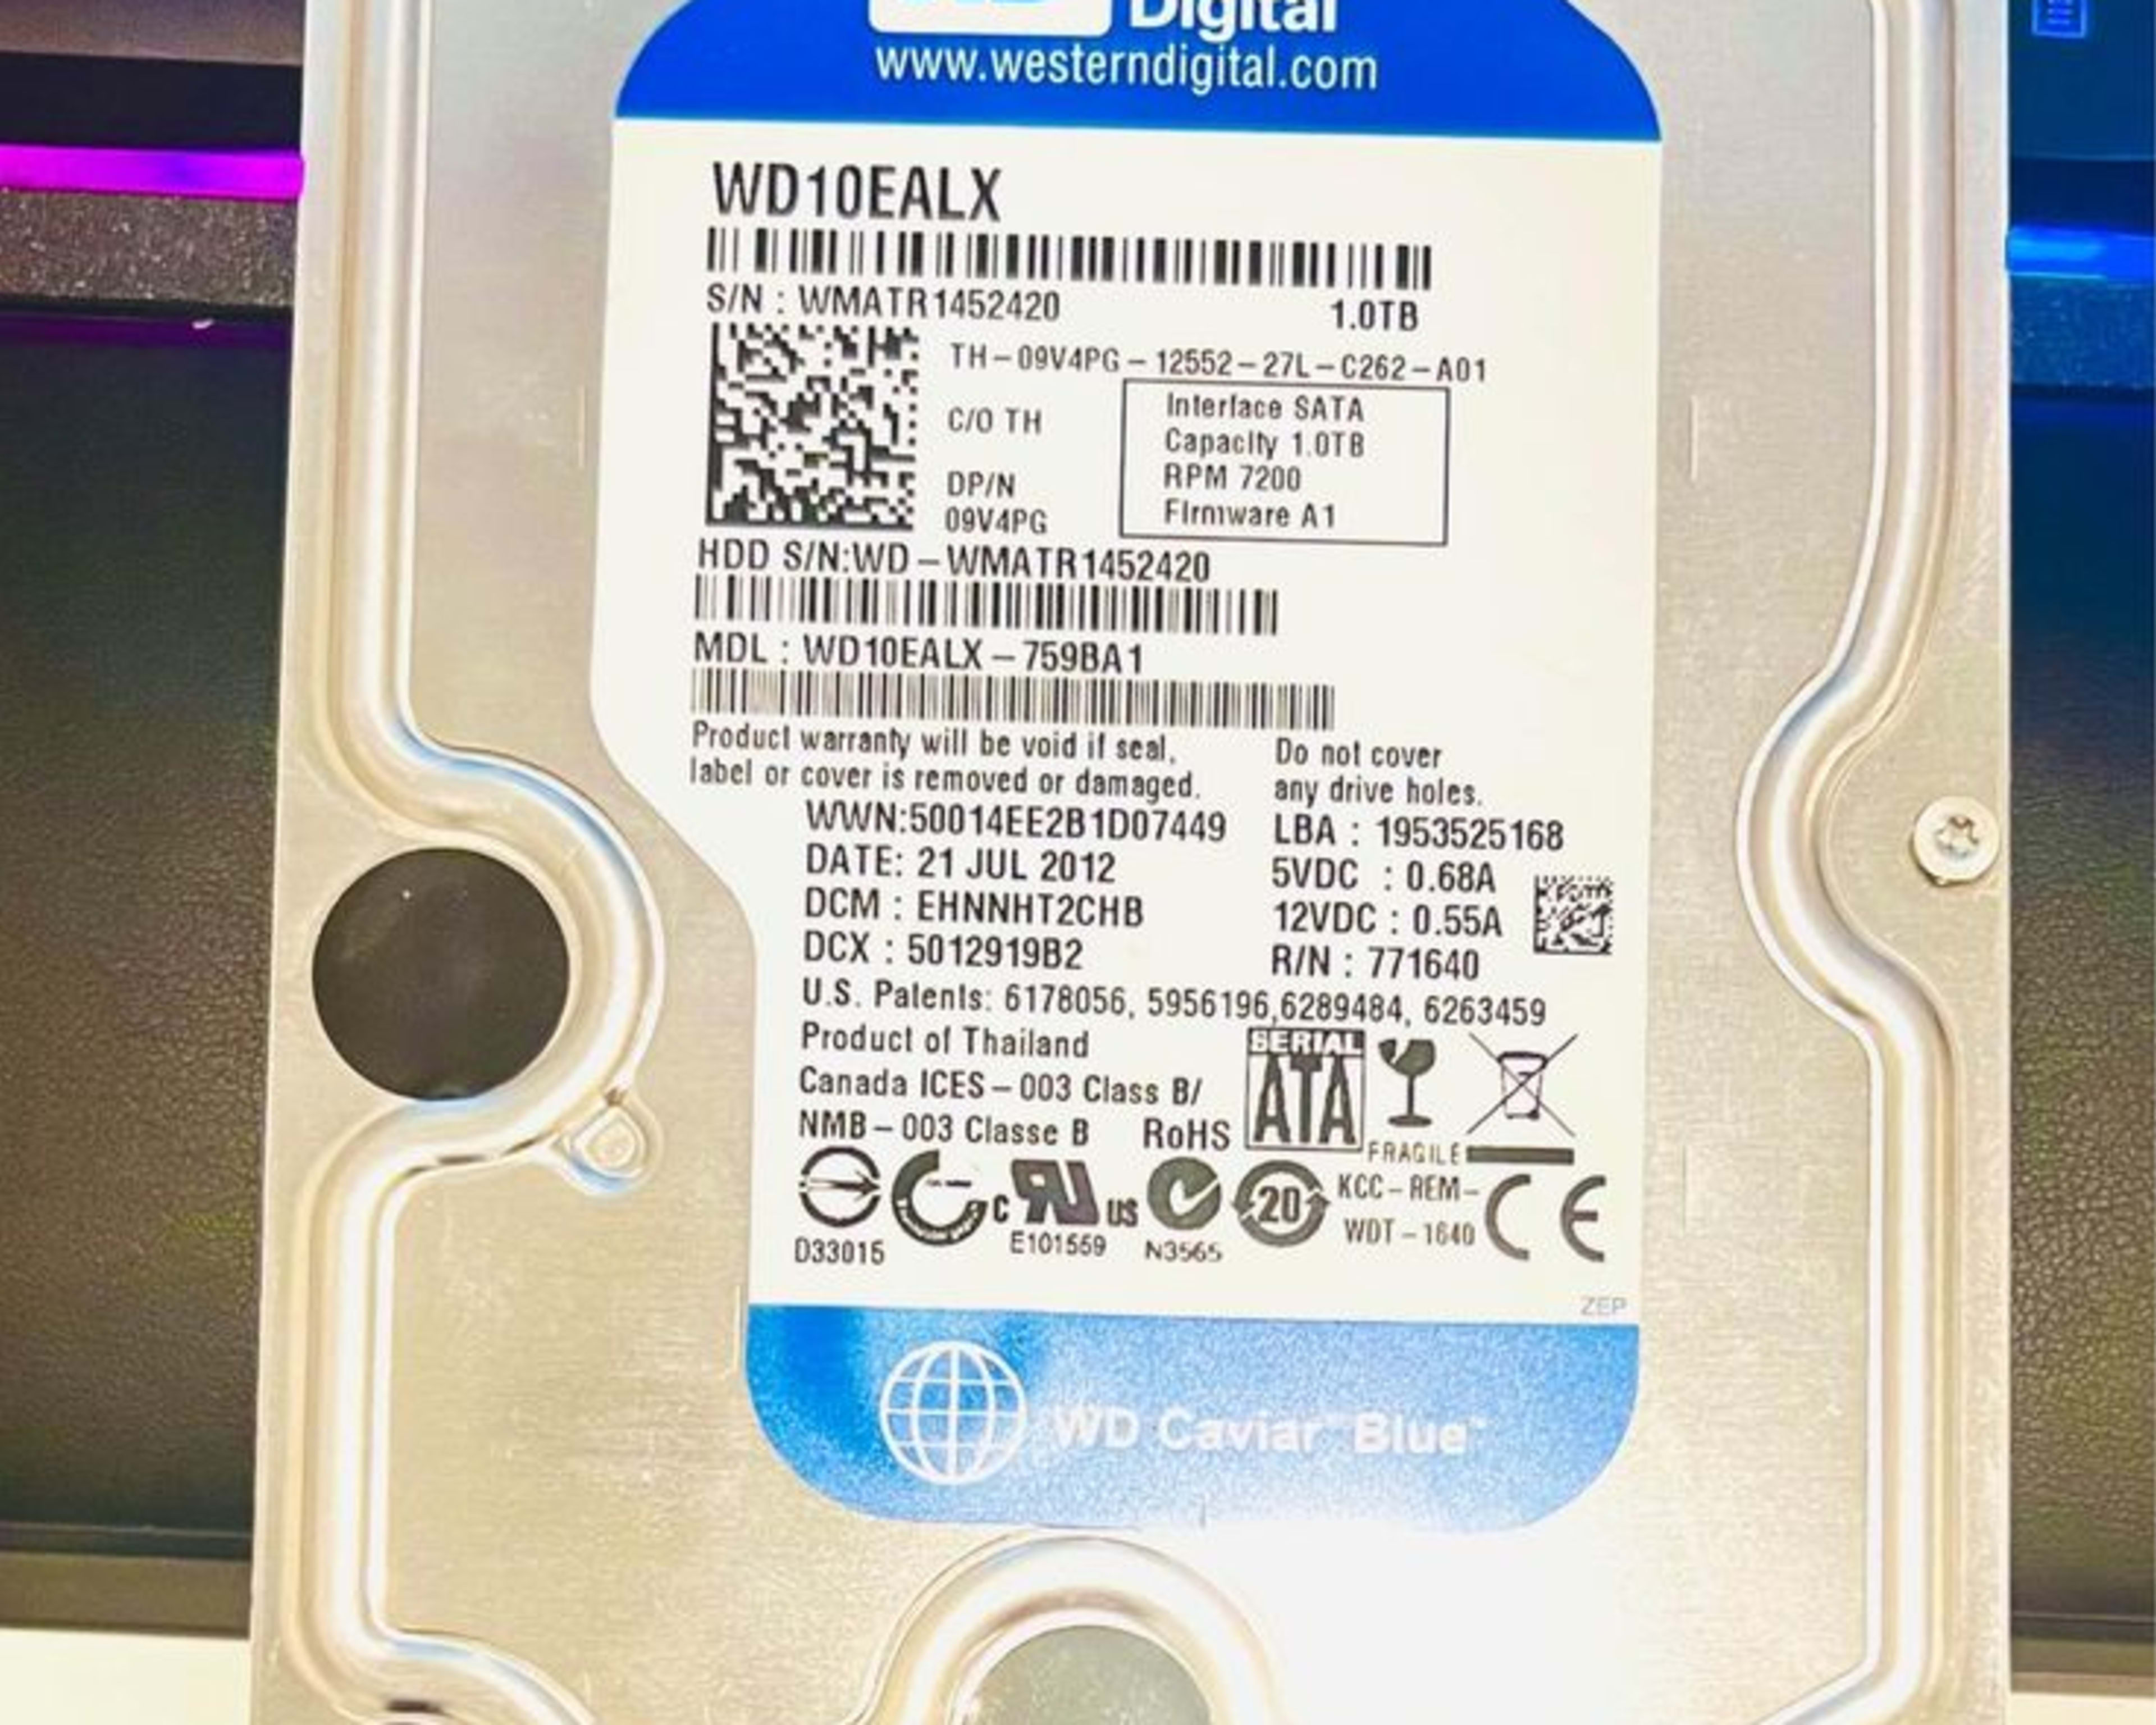 WD 1 TB HDD 7200RPM for Sale 3.5 inch